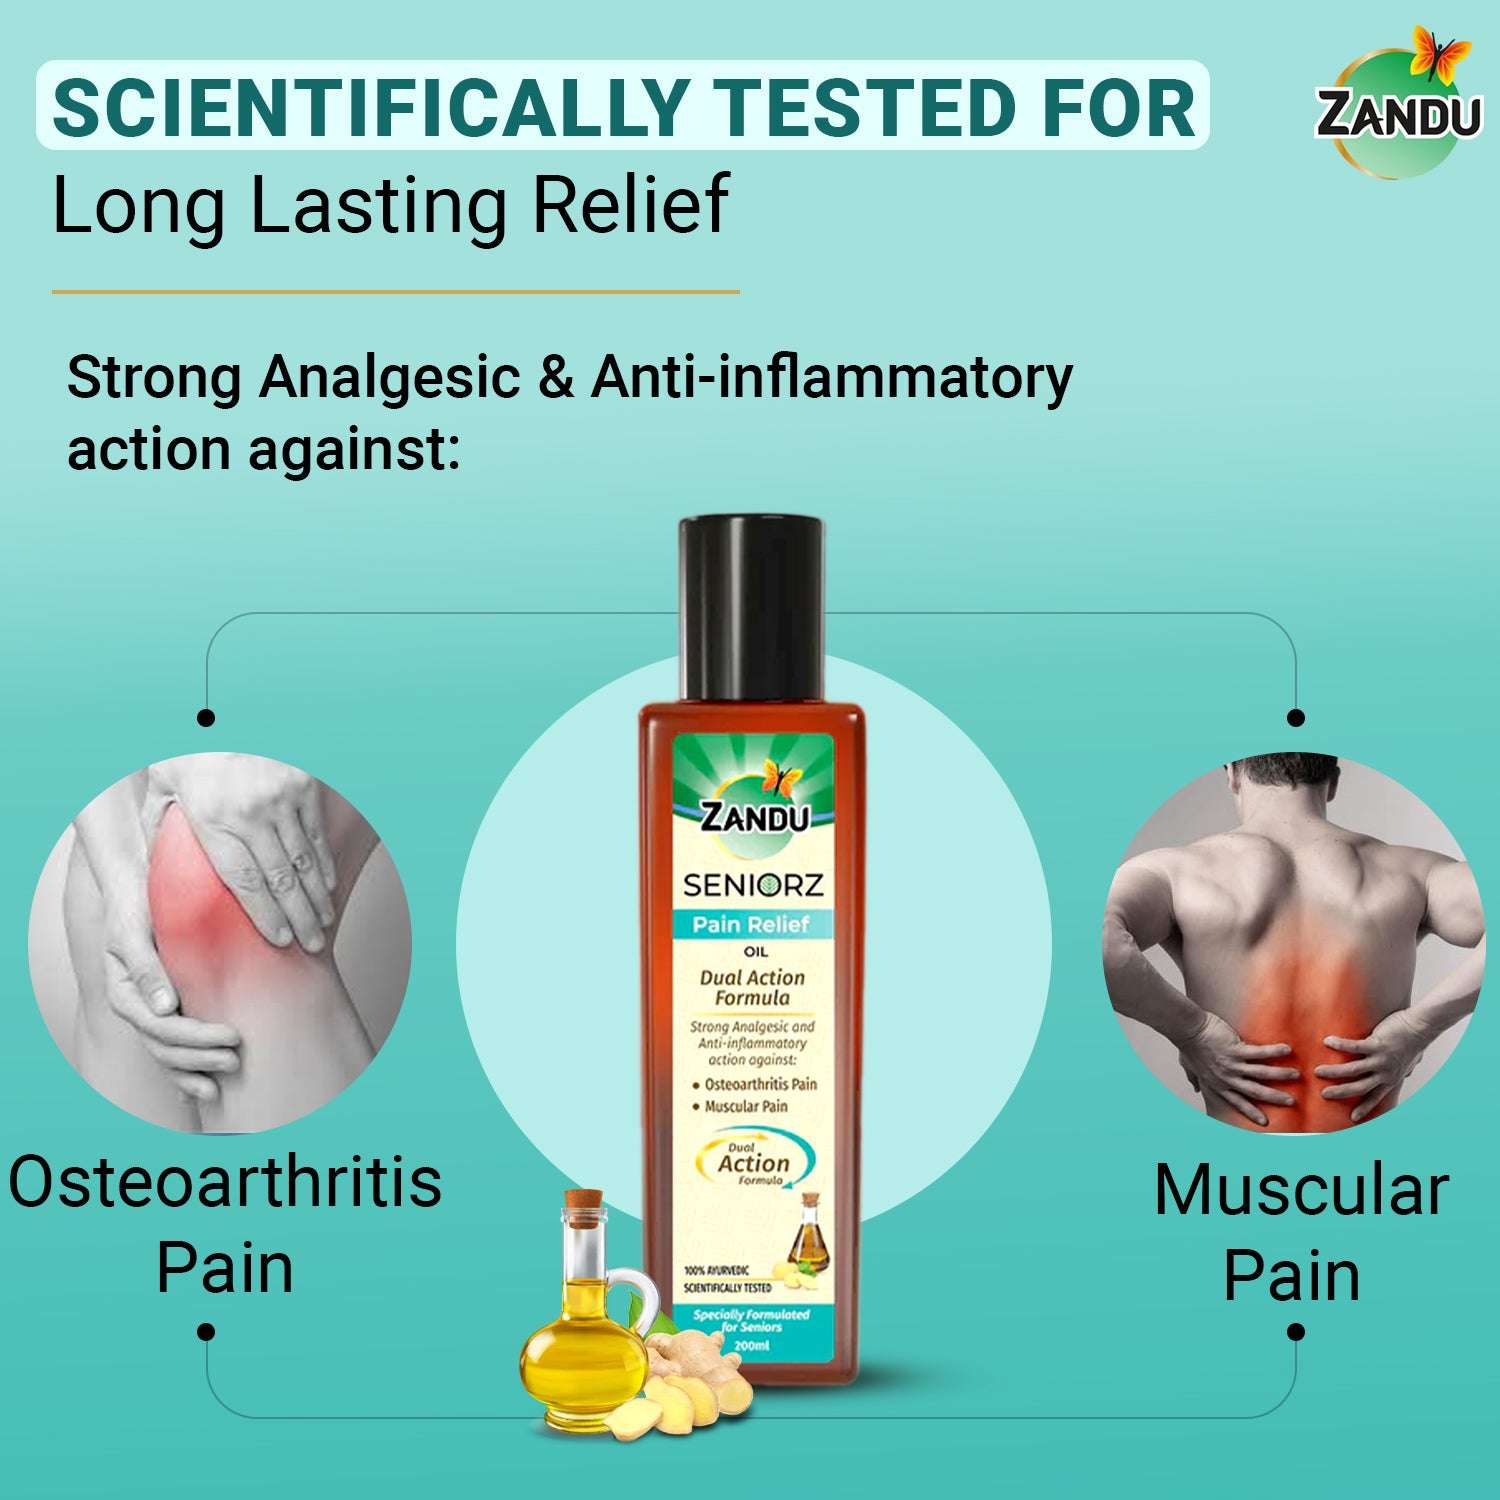 Seniorz Pain Relief Oil for Senior Citizens - Cures Muscle, Joint & Knee Pain (200ml)